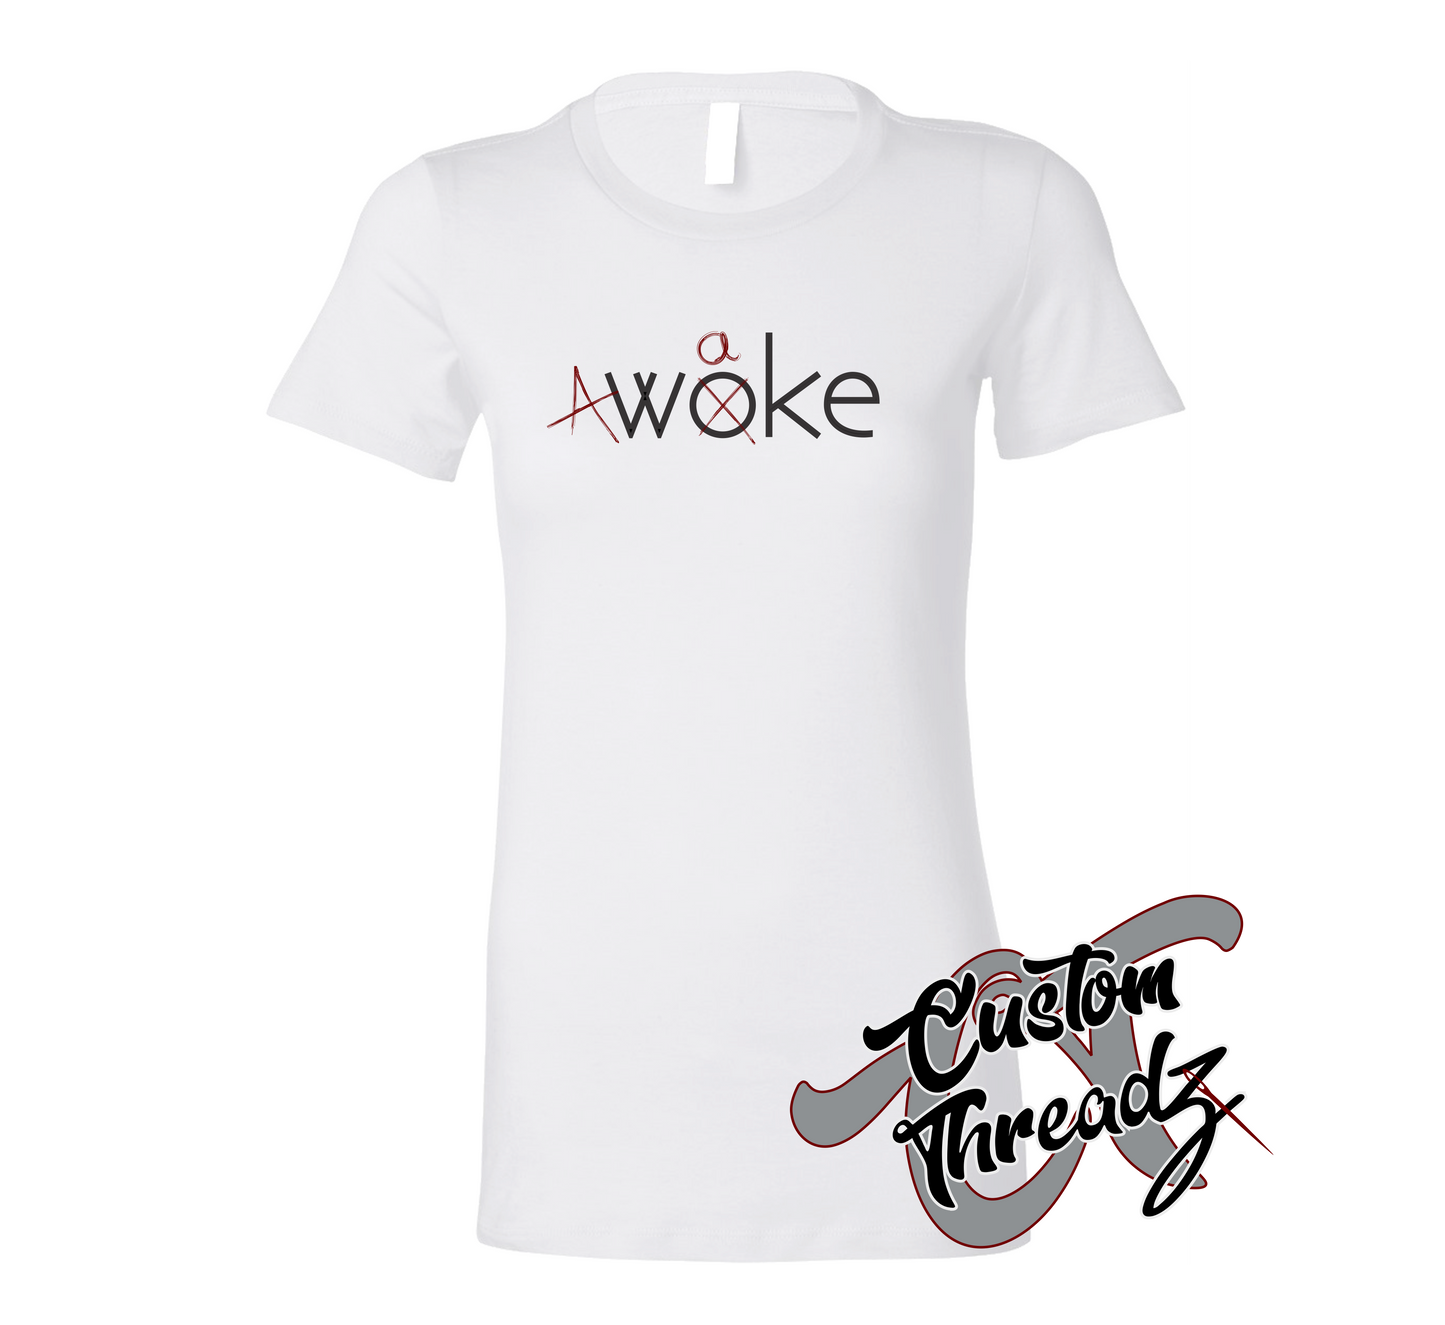 womens white tee with A-woke DTG printed design